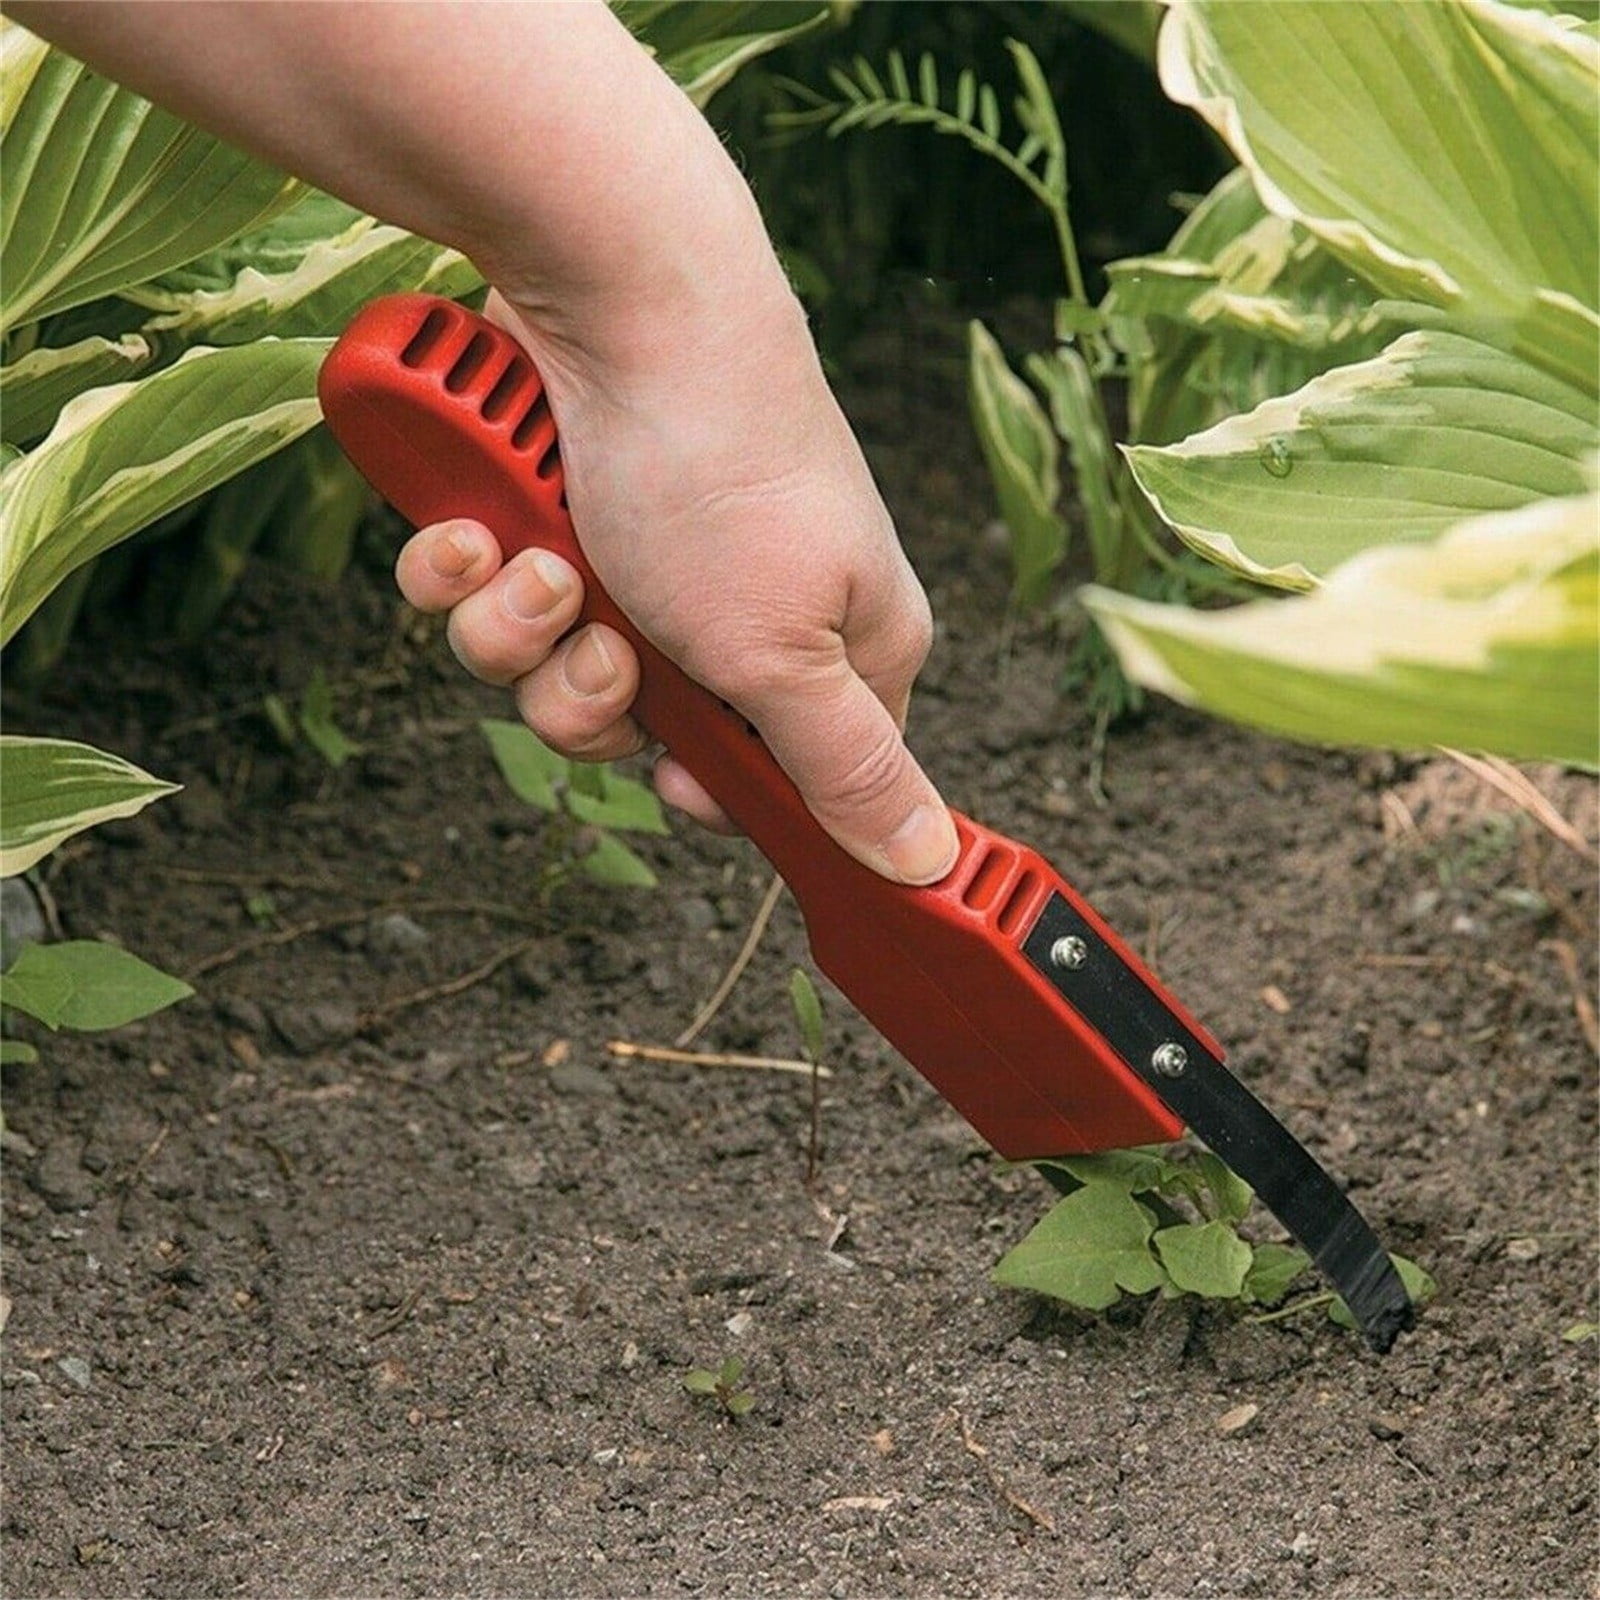 HEAVY DUTY HAND WEEDER Weed Remover Garden Path Cleaning Tool Weeds Control 